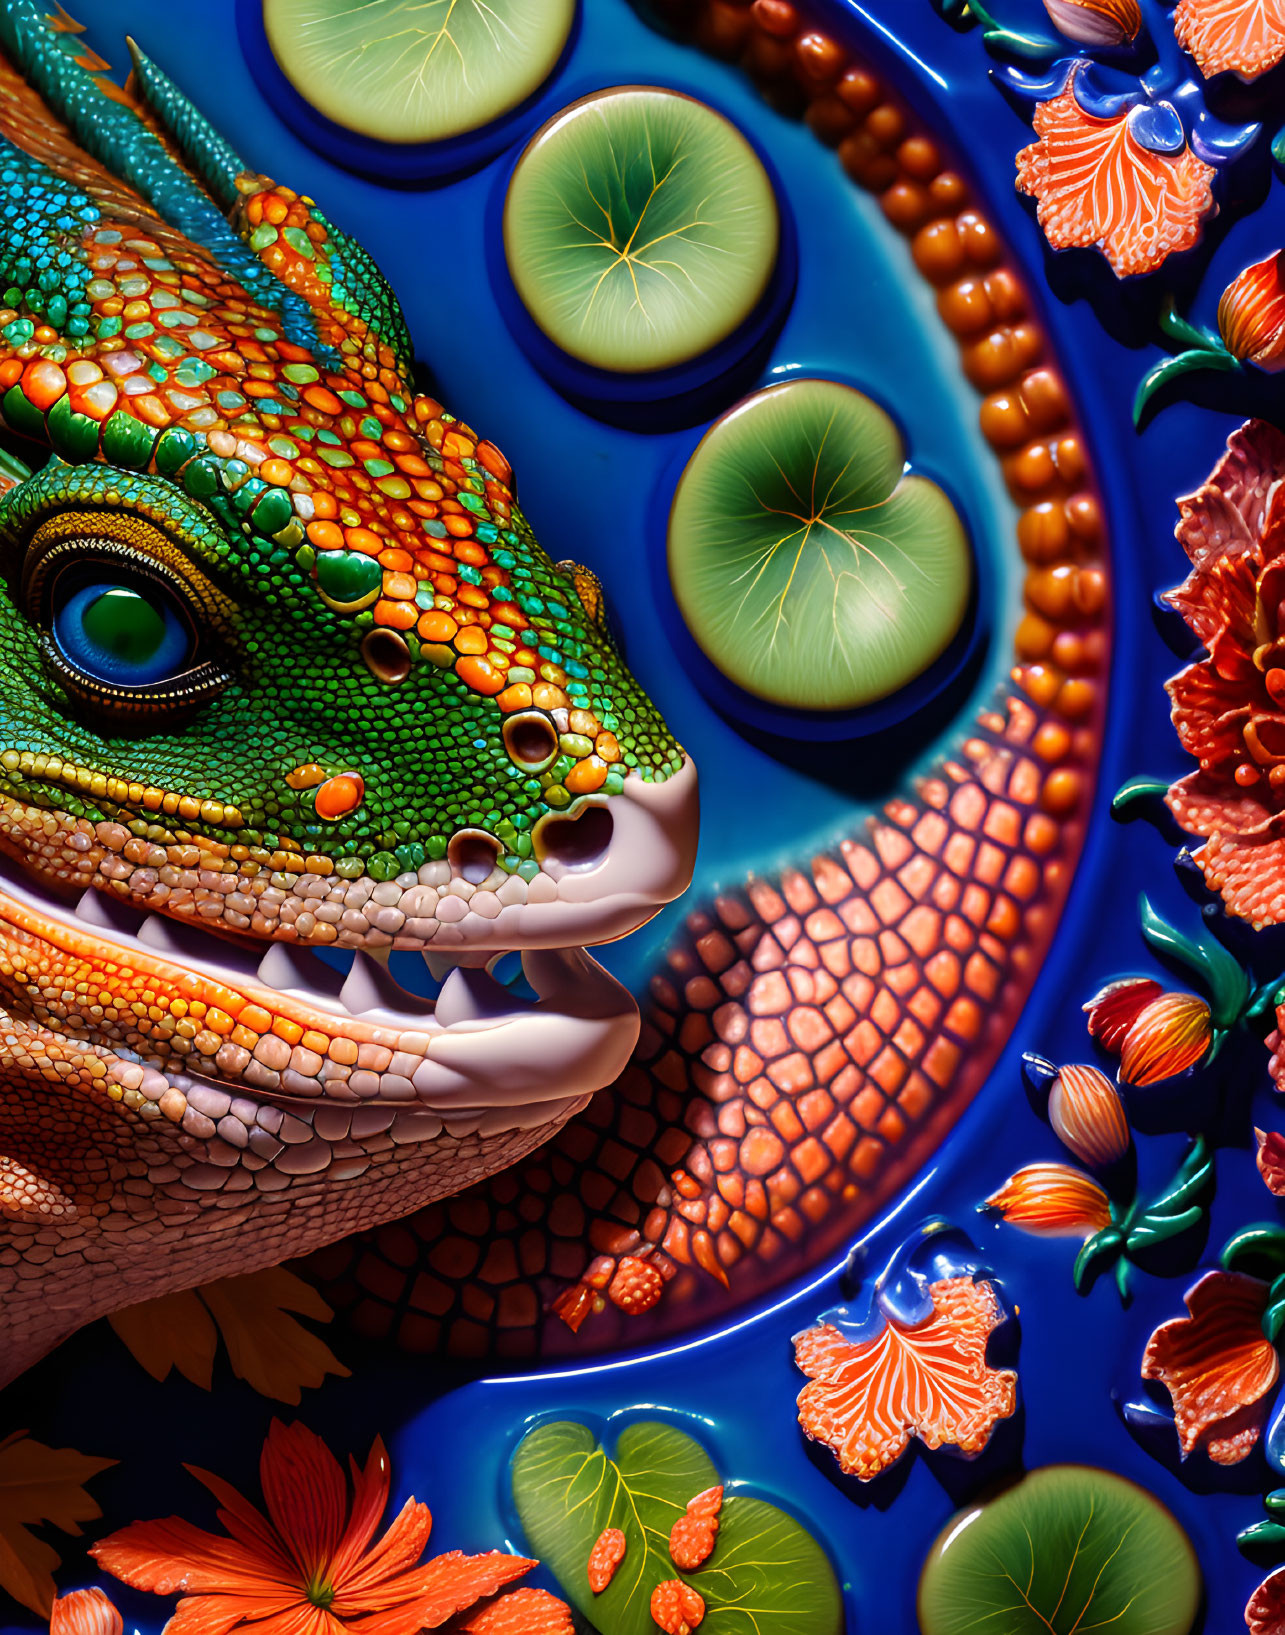 Detailed green dragon surrounded by lotus leaves and orange flowers on blue background